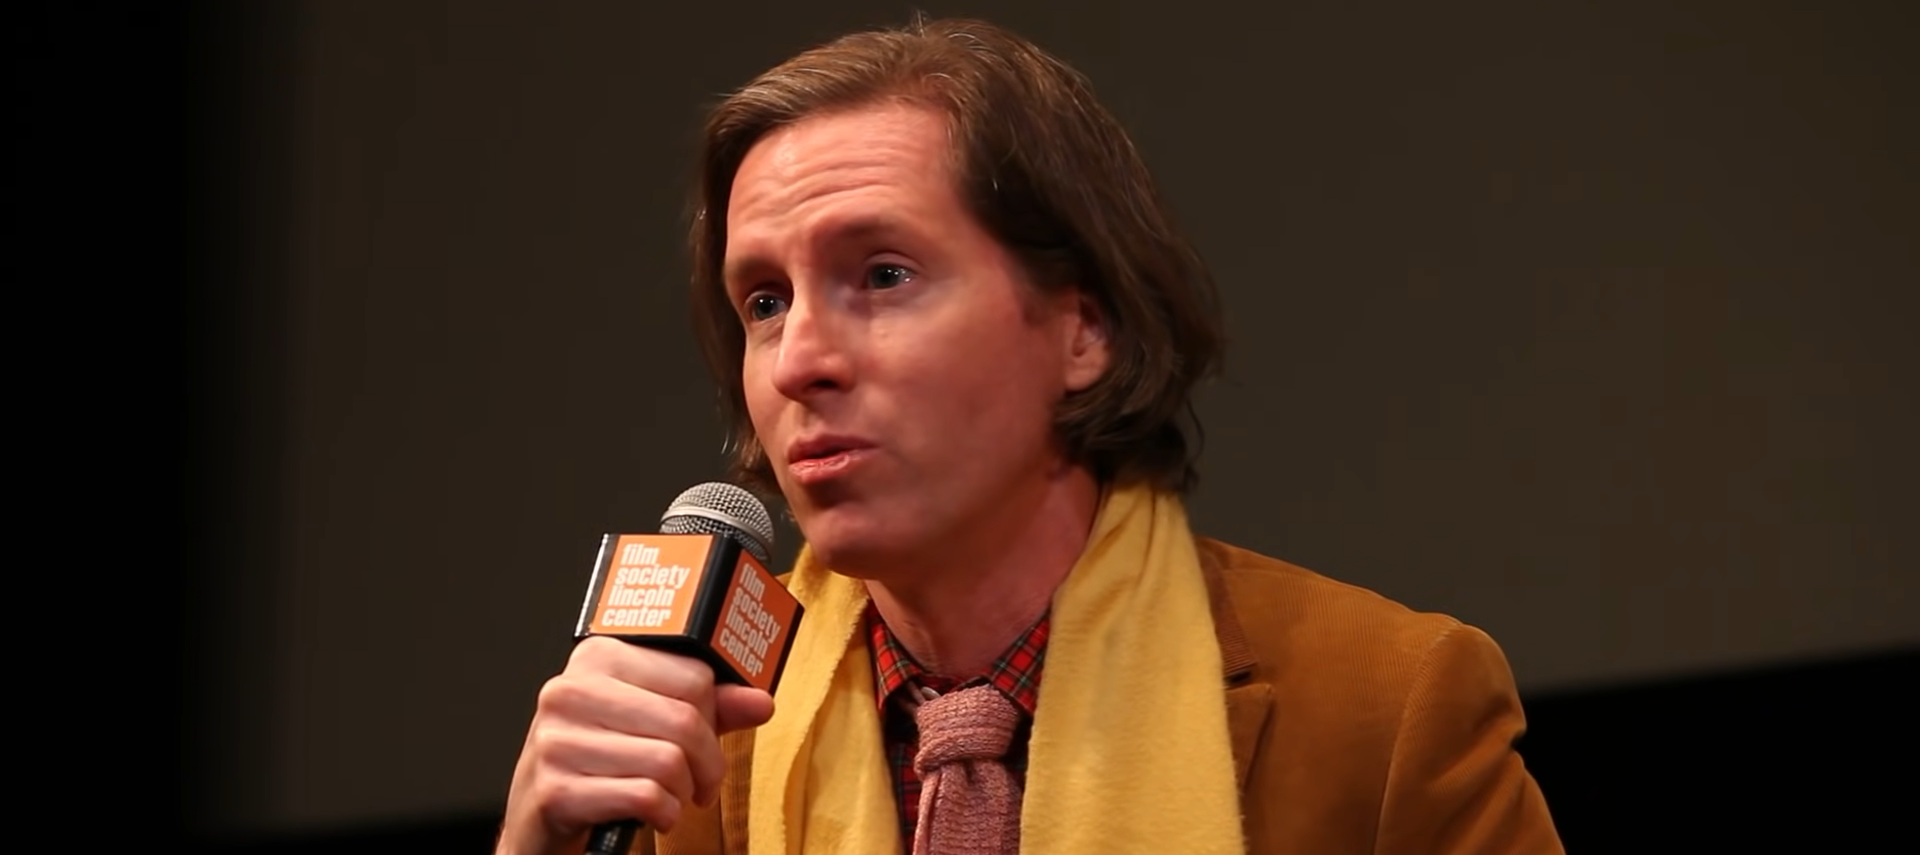 Wes Anderson’s New Film Titled The Phoenician Scheme; Filming in the UK This Spring